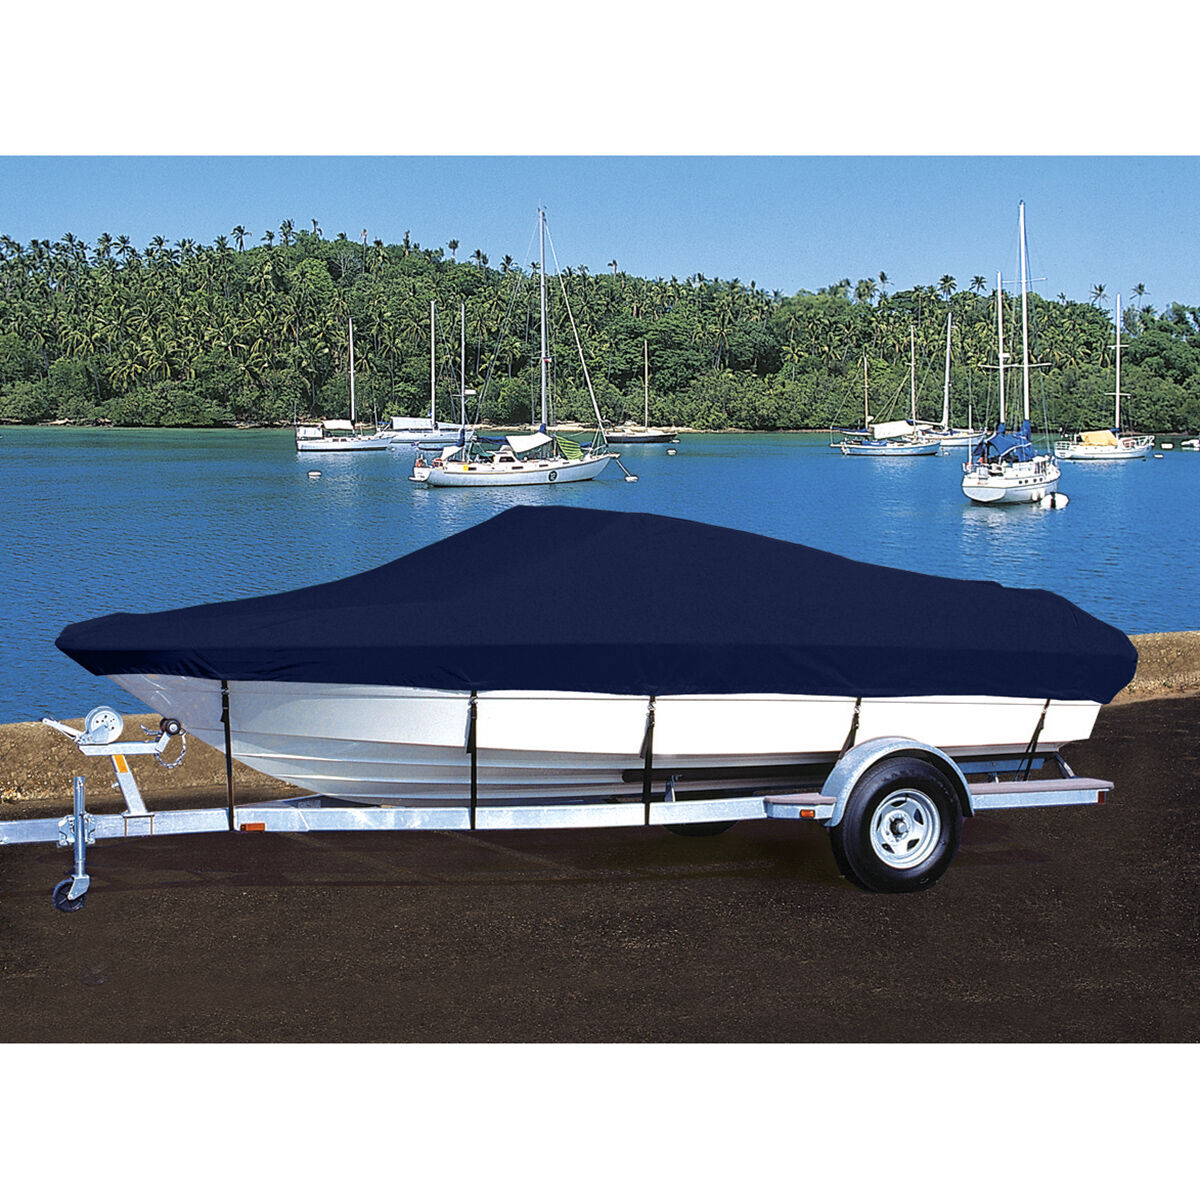 Taylor Made Trailerite Hot Shot Cover for 95-97 Stratos 268 FS OB PTM Boat Cover in Navy Blue Polyester